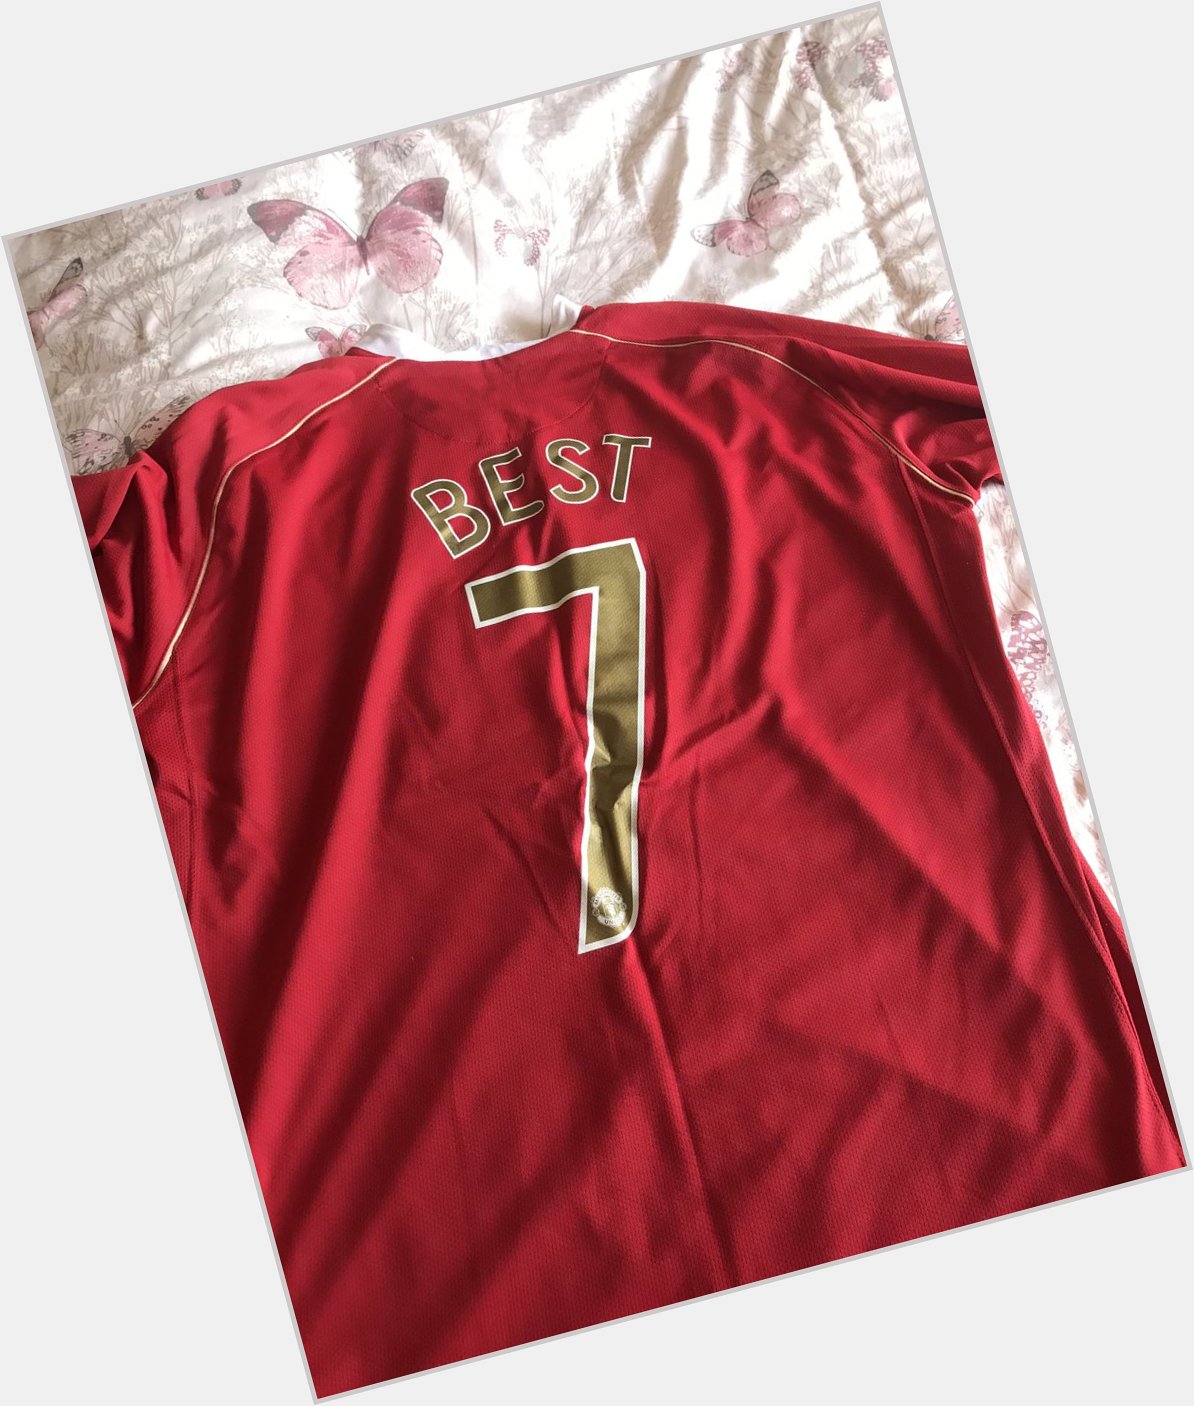 Got to get this shirt out today happy heavenly birthday George Best  